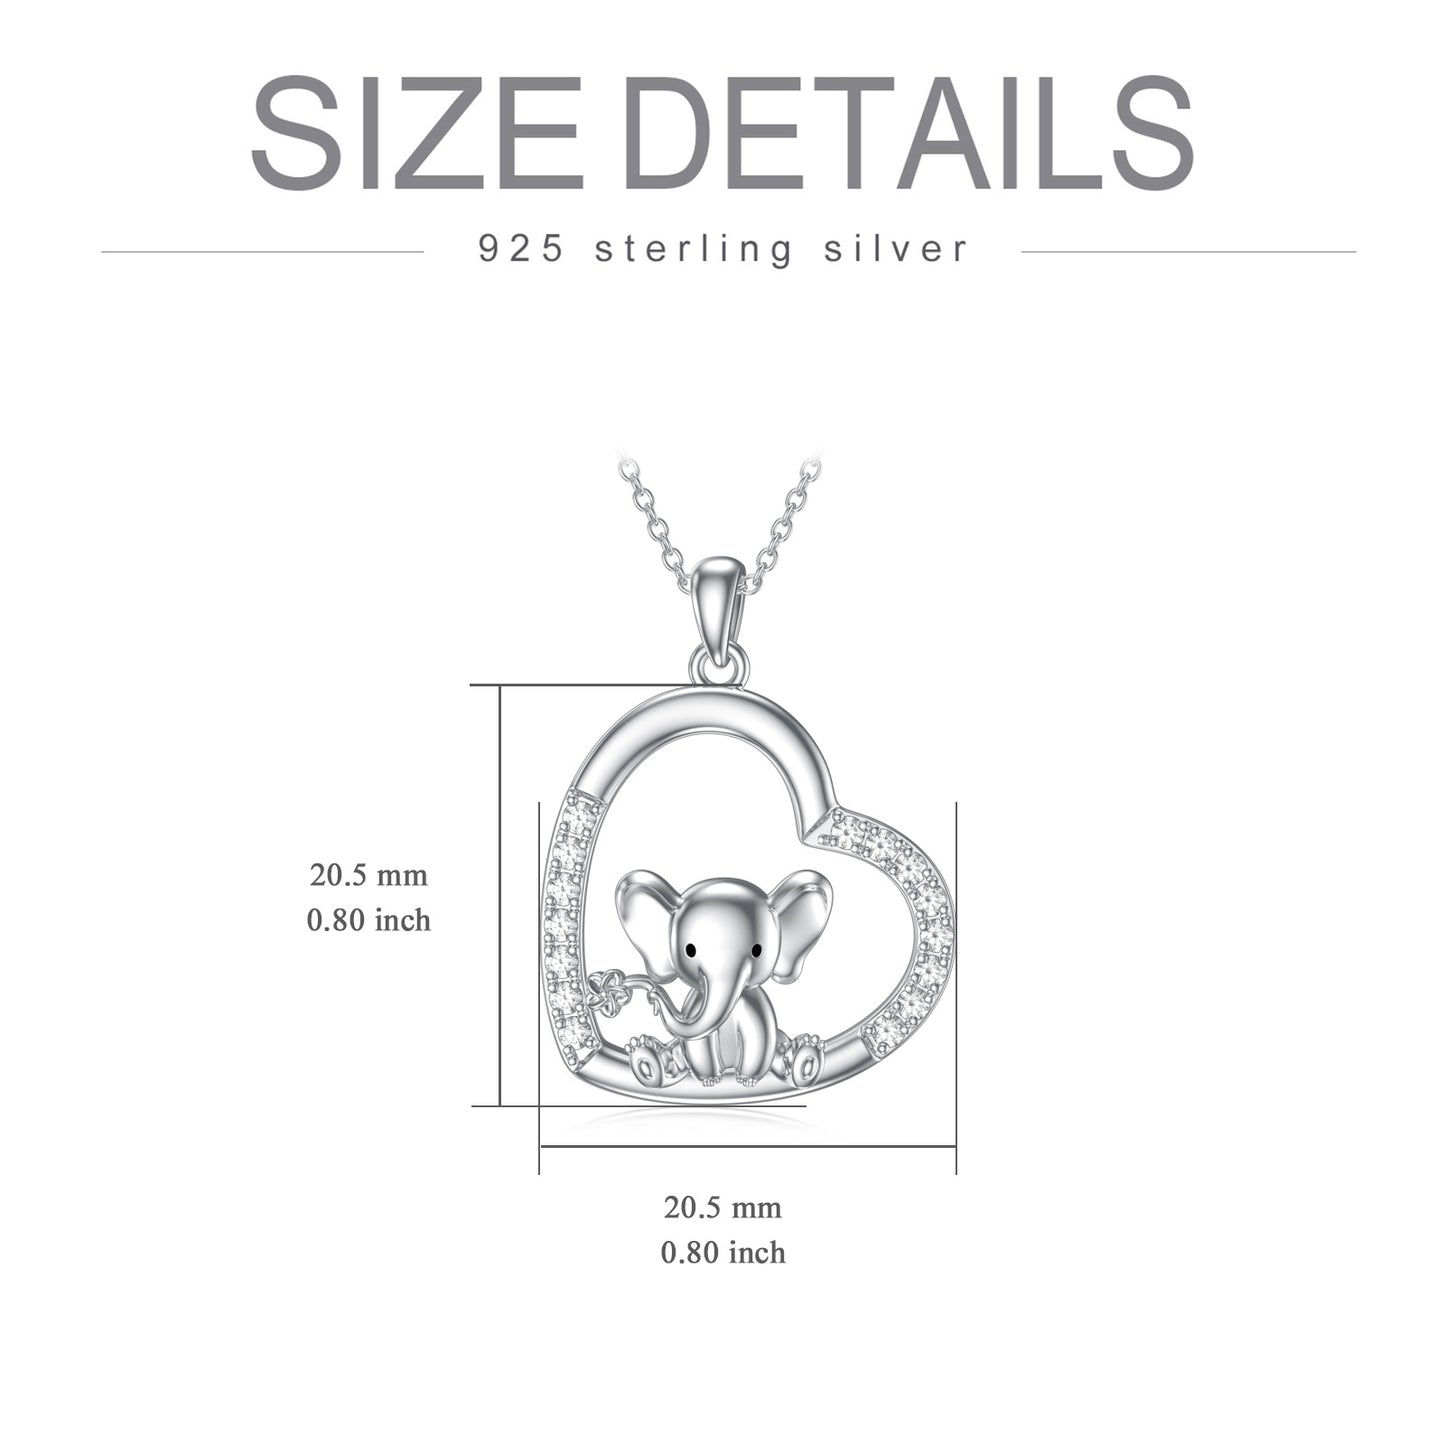 Sterling Silver Elephant Pendant and Necklace- Gifts for Women